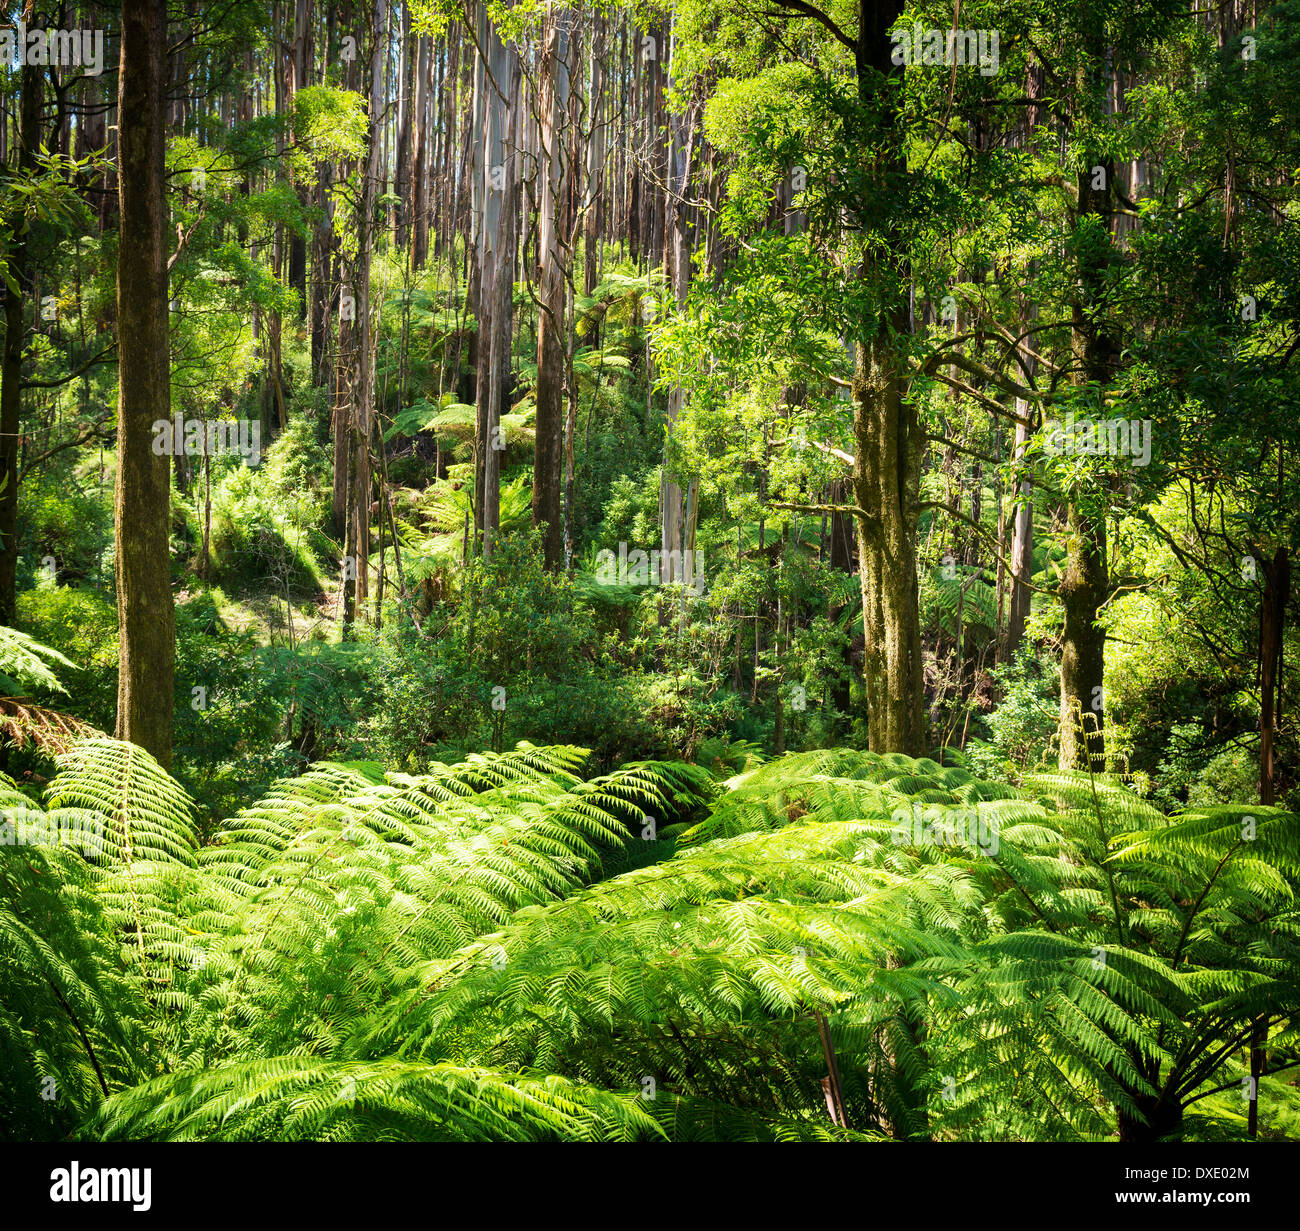 Lush green ferns, tree ferns and towering mountain ash along the Black Spur, Victoria, Australia Stock Photo